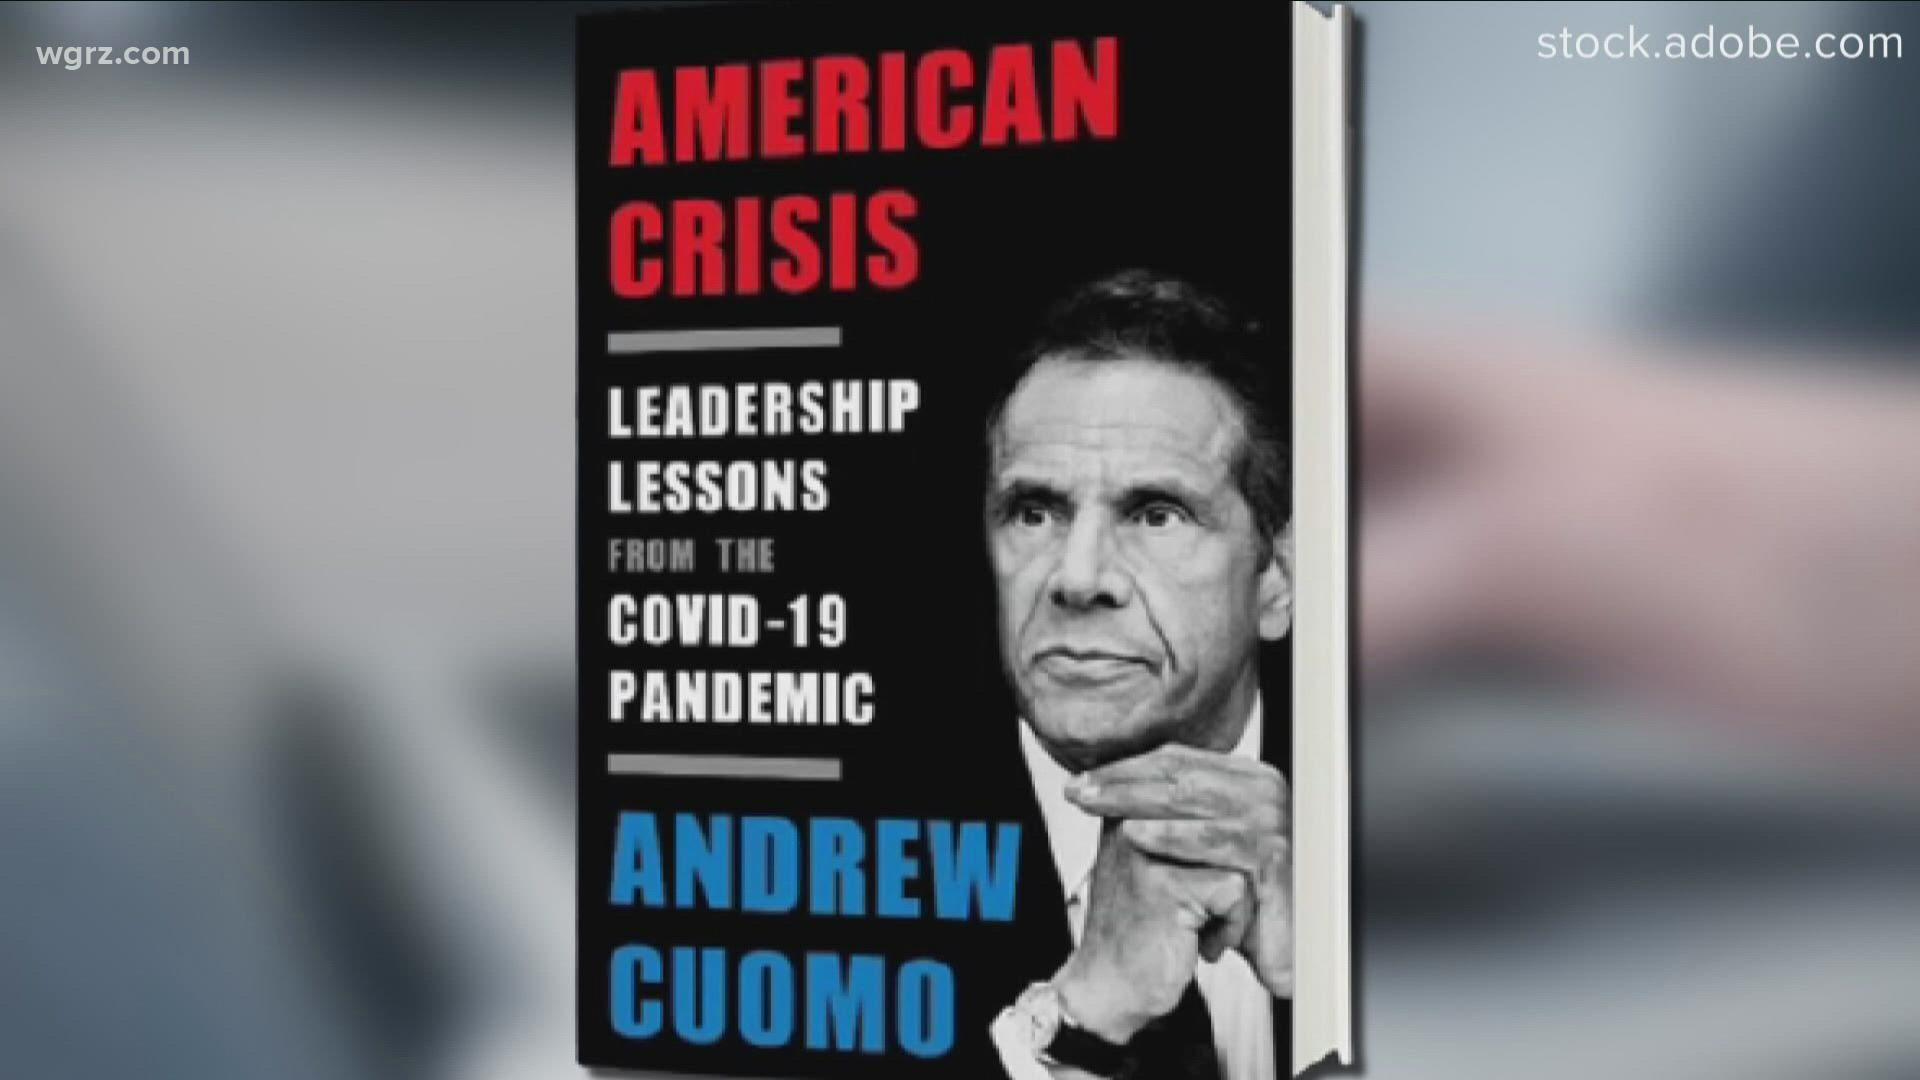 Cuomo's attorney that no government staff would be used to edit the book - which Cuomo says did happen, but only on their own time.